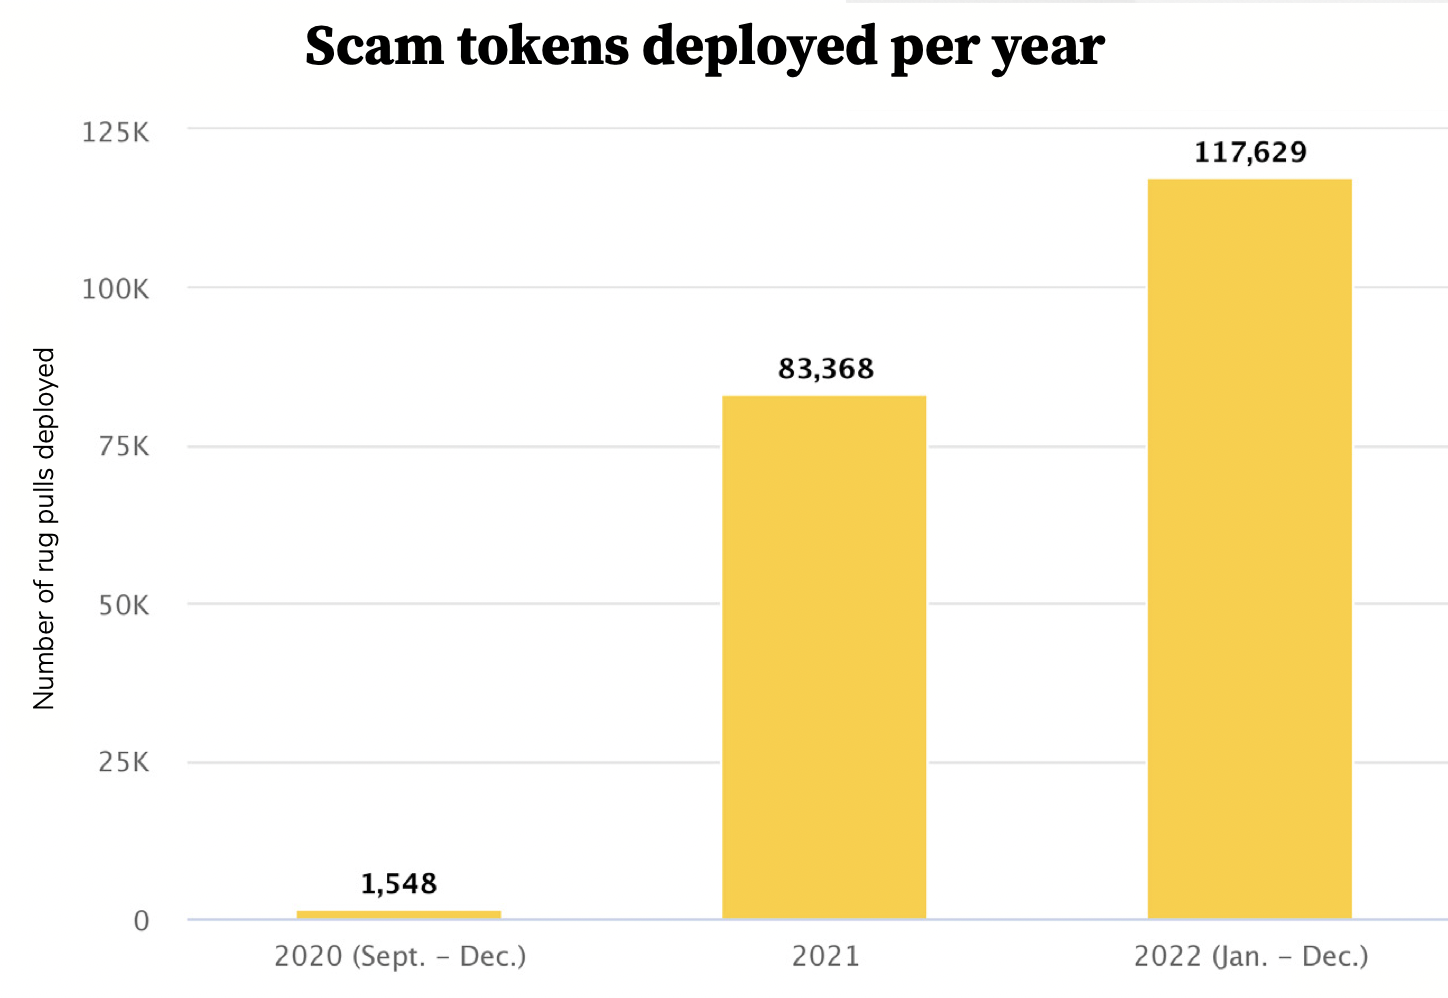 Over 200,000 tokens out of 1.8 million were scam tokens in 2022.